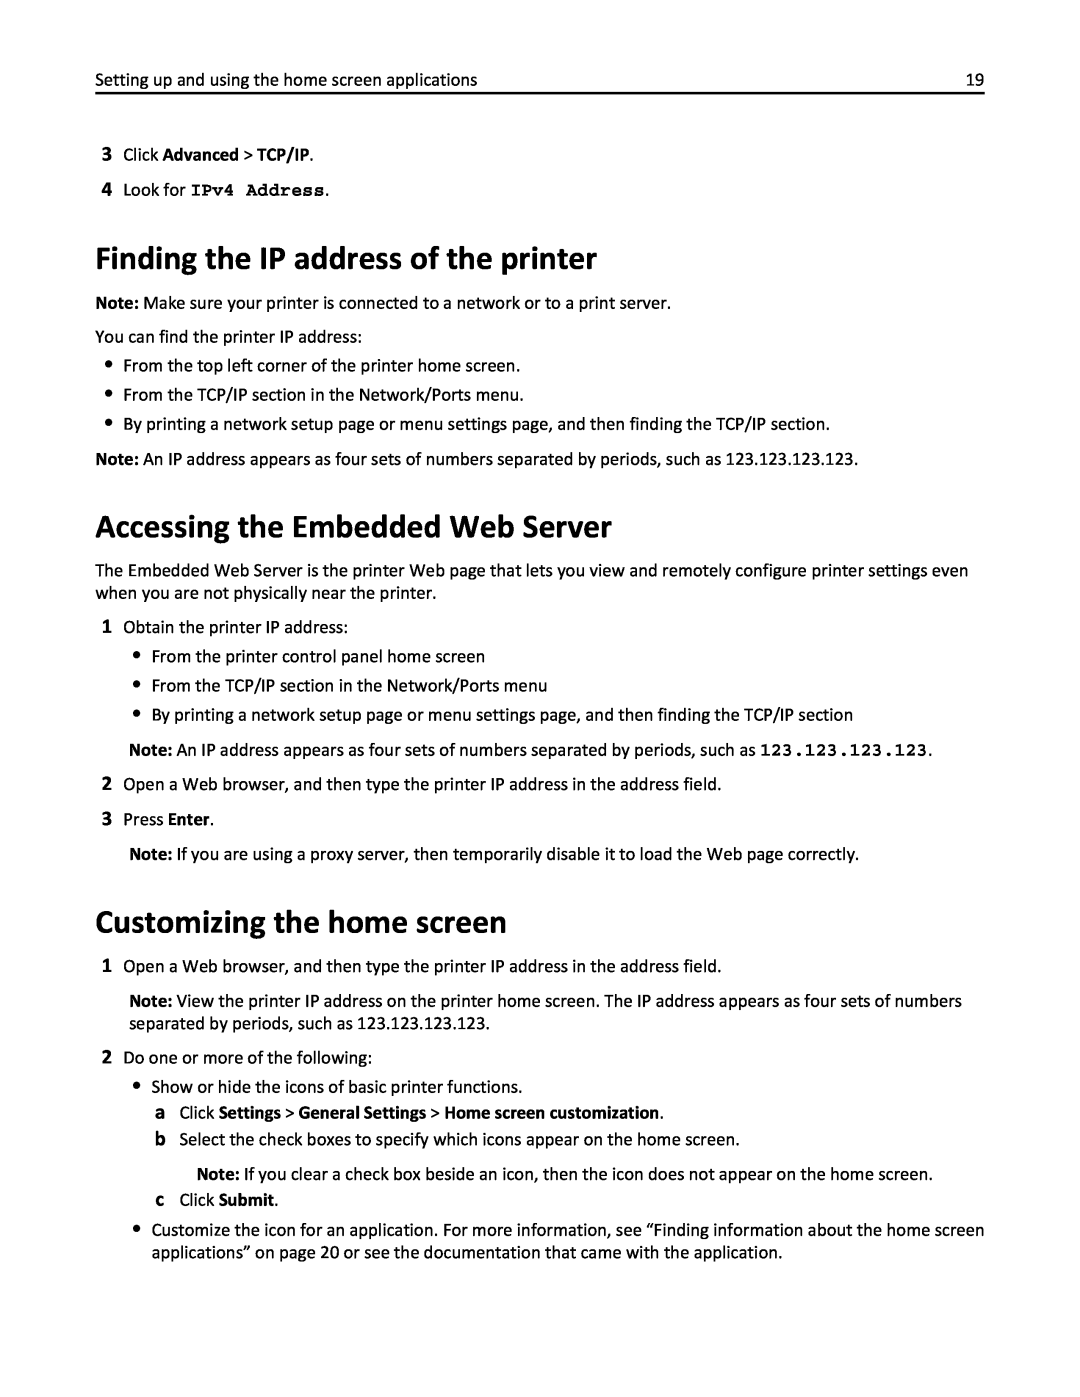 Lexmark MX410, 470 Finding the IP address of the printer, Accessing the Embedded Web Server, Customizing the home screen 